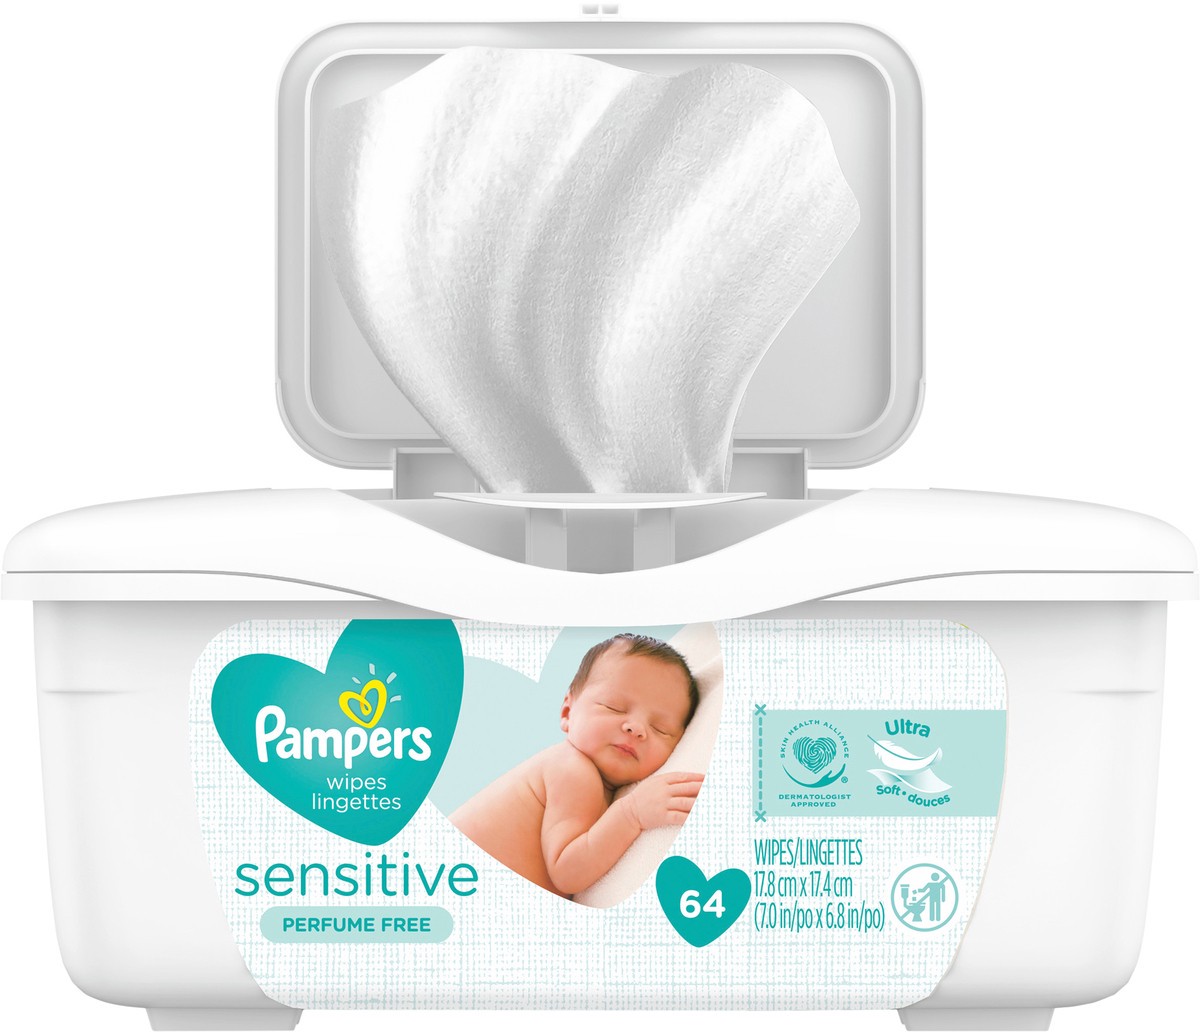 slide 4 of 4, Pampers Baby Wipes Sensitive Perfume Free Tub 64 Count, 64 ct